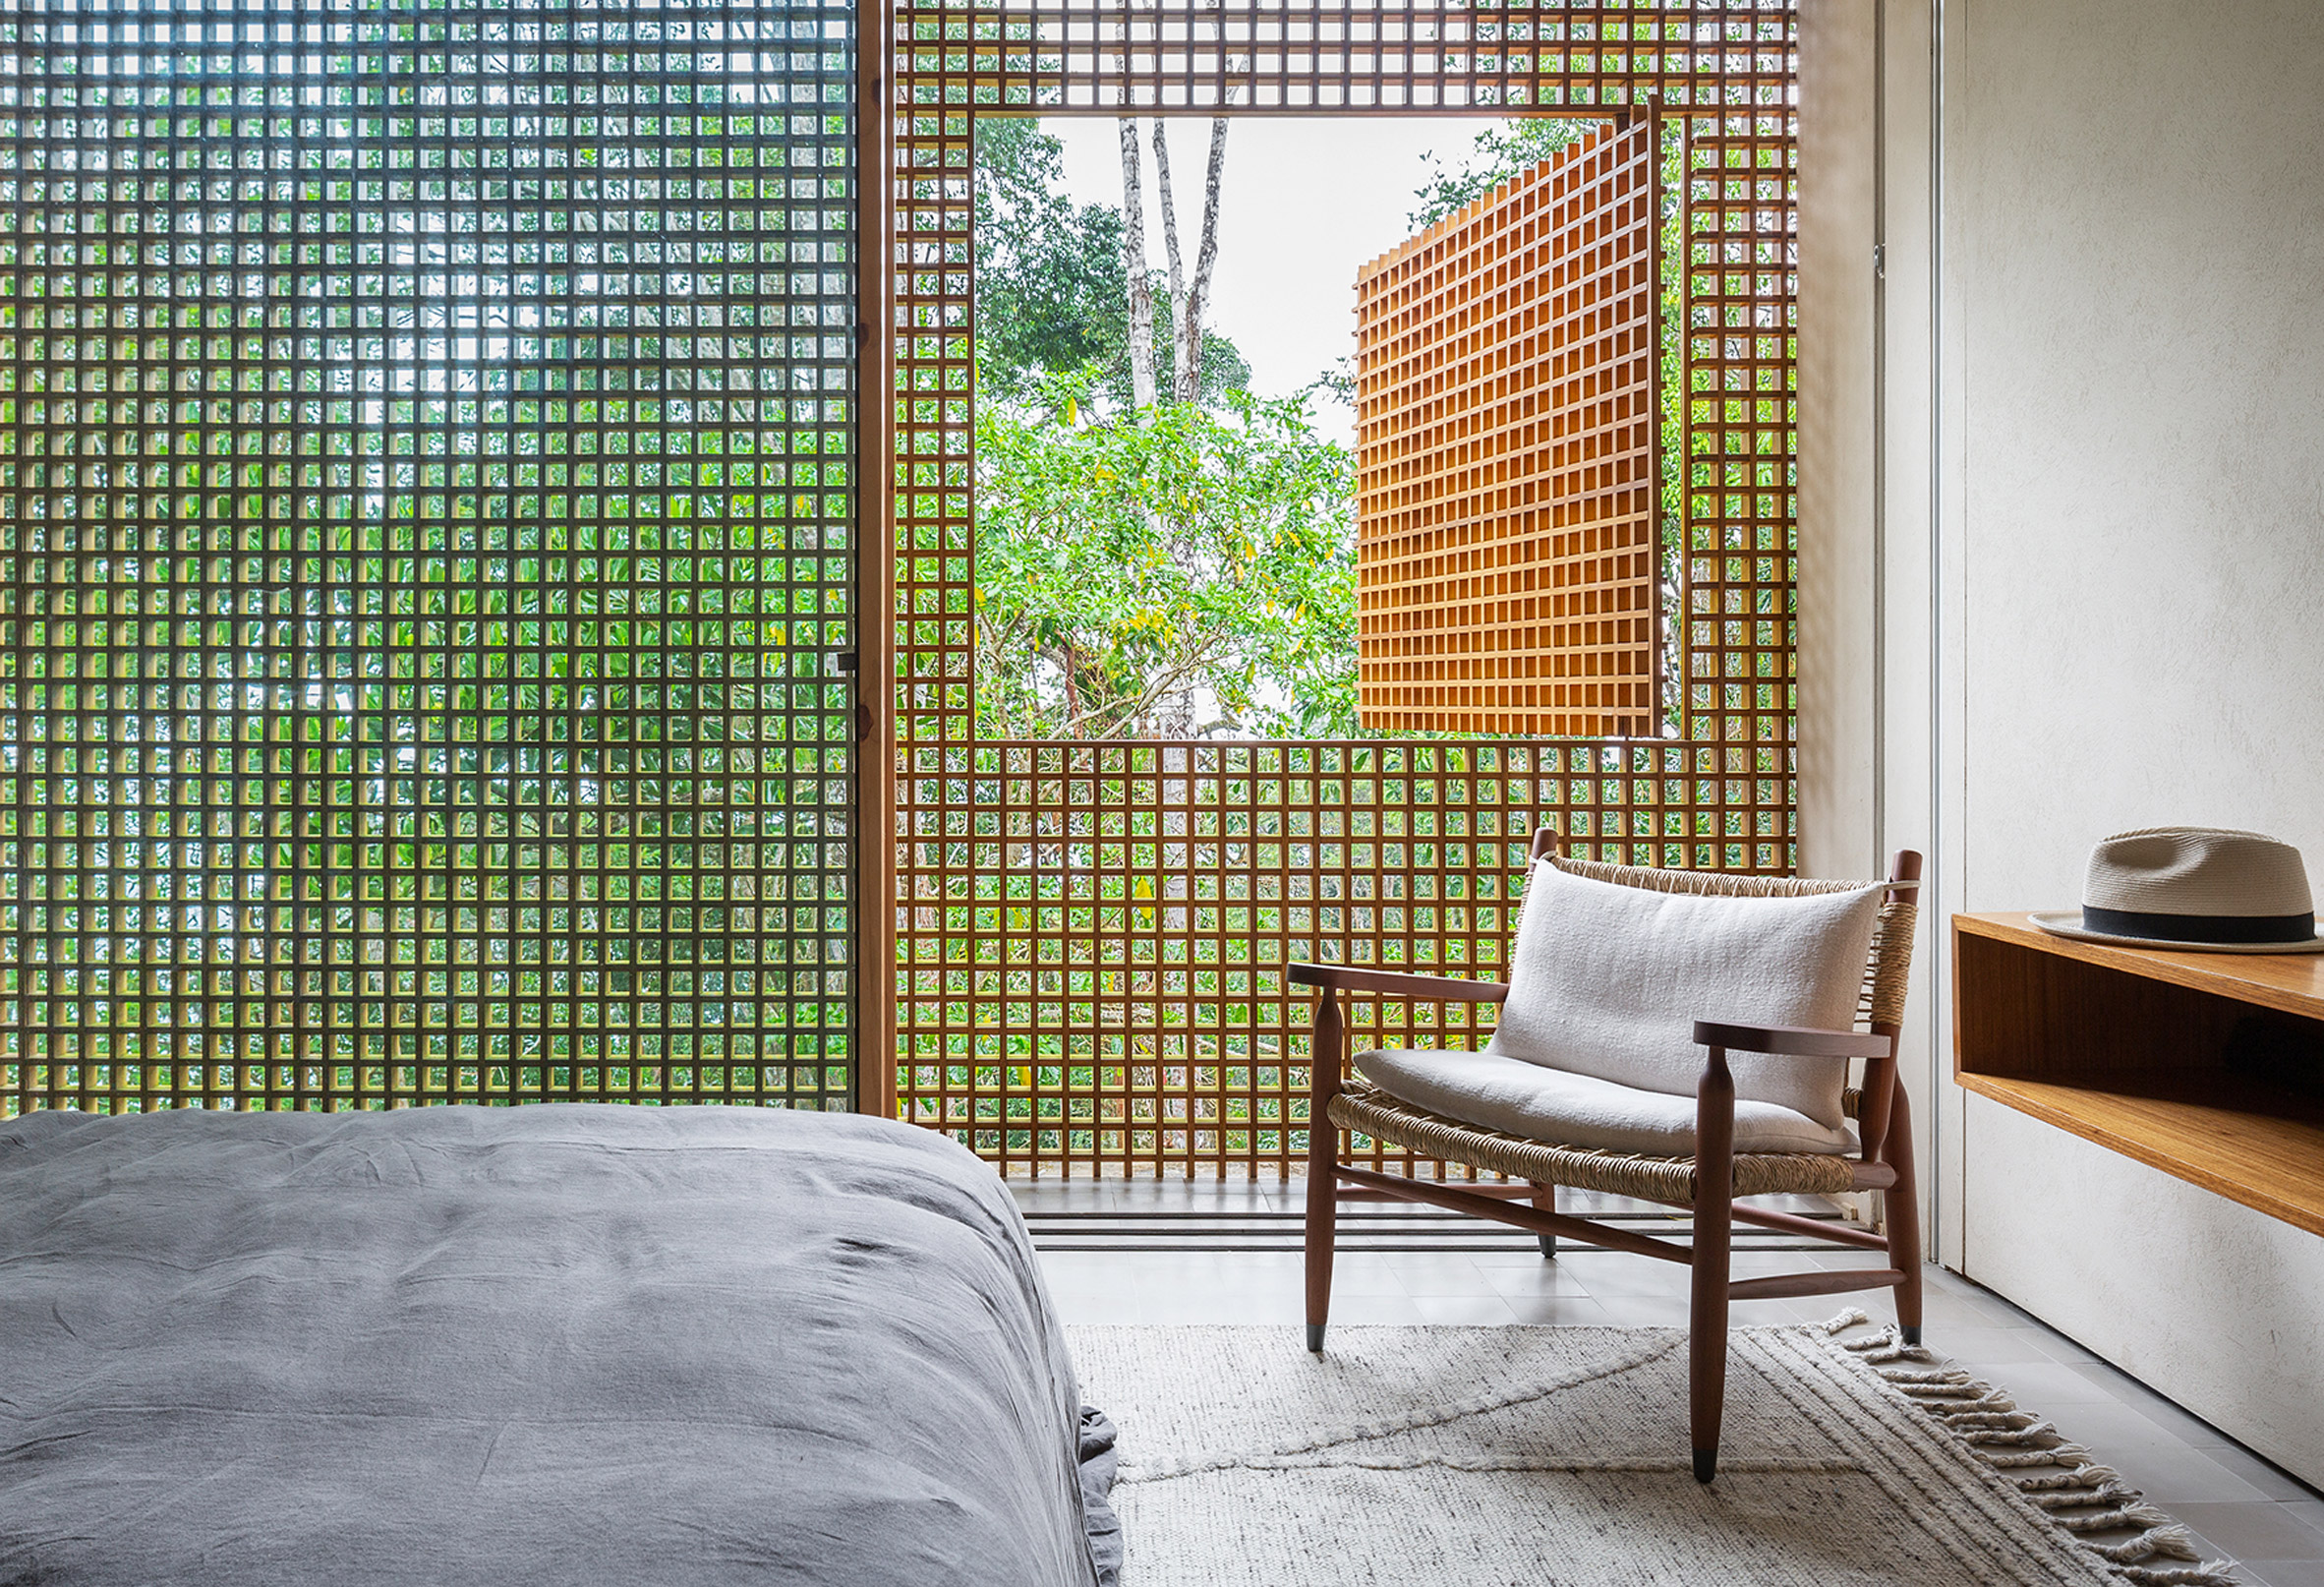 Bedroom in Casa Azul with wooden lattice screen with an opening